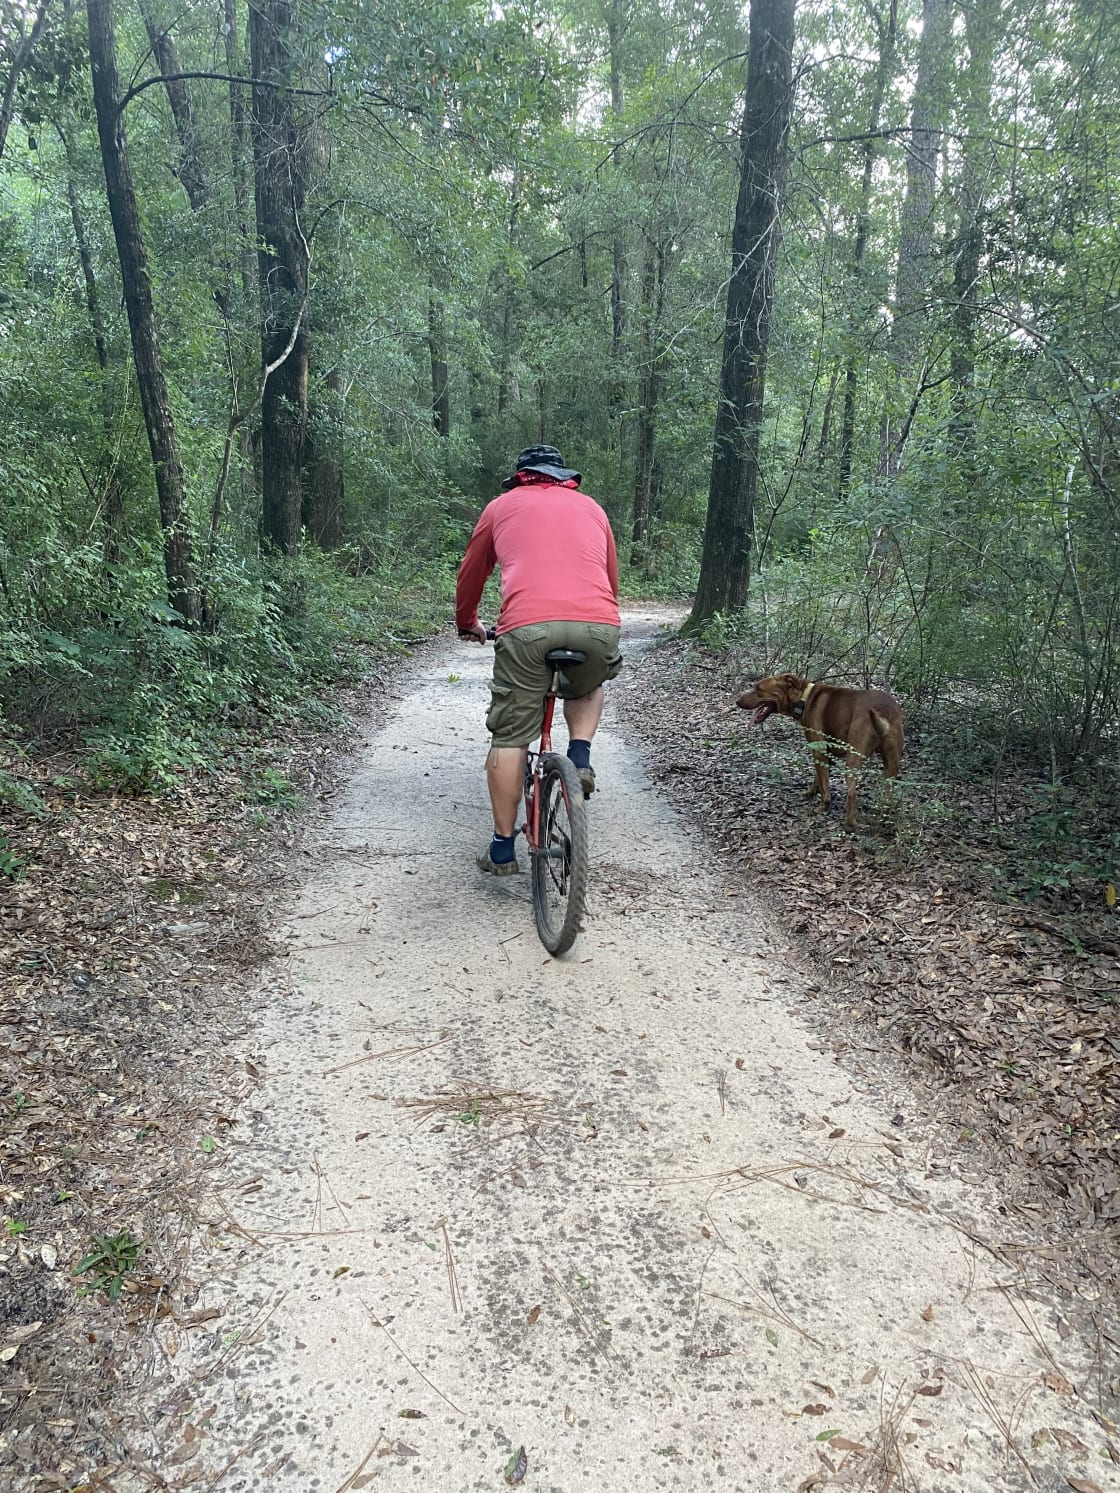 Trails are good for biking too!